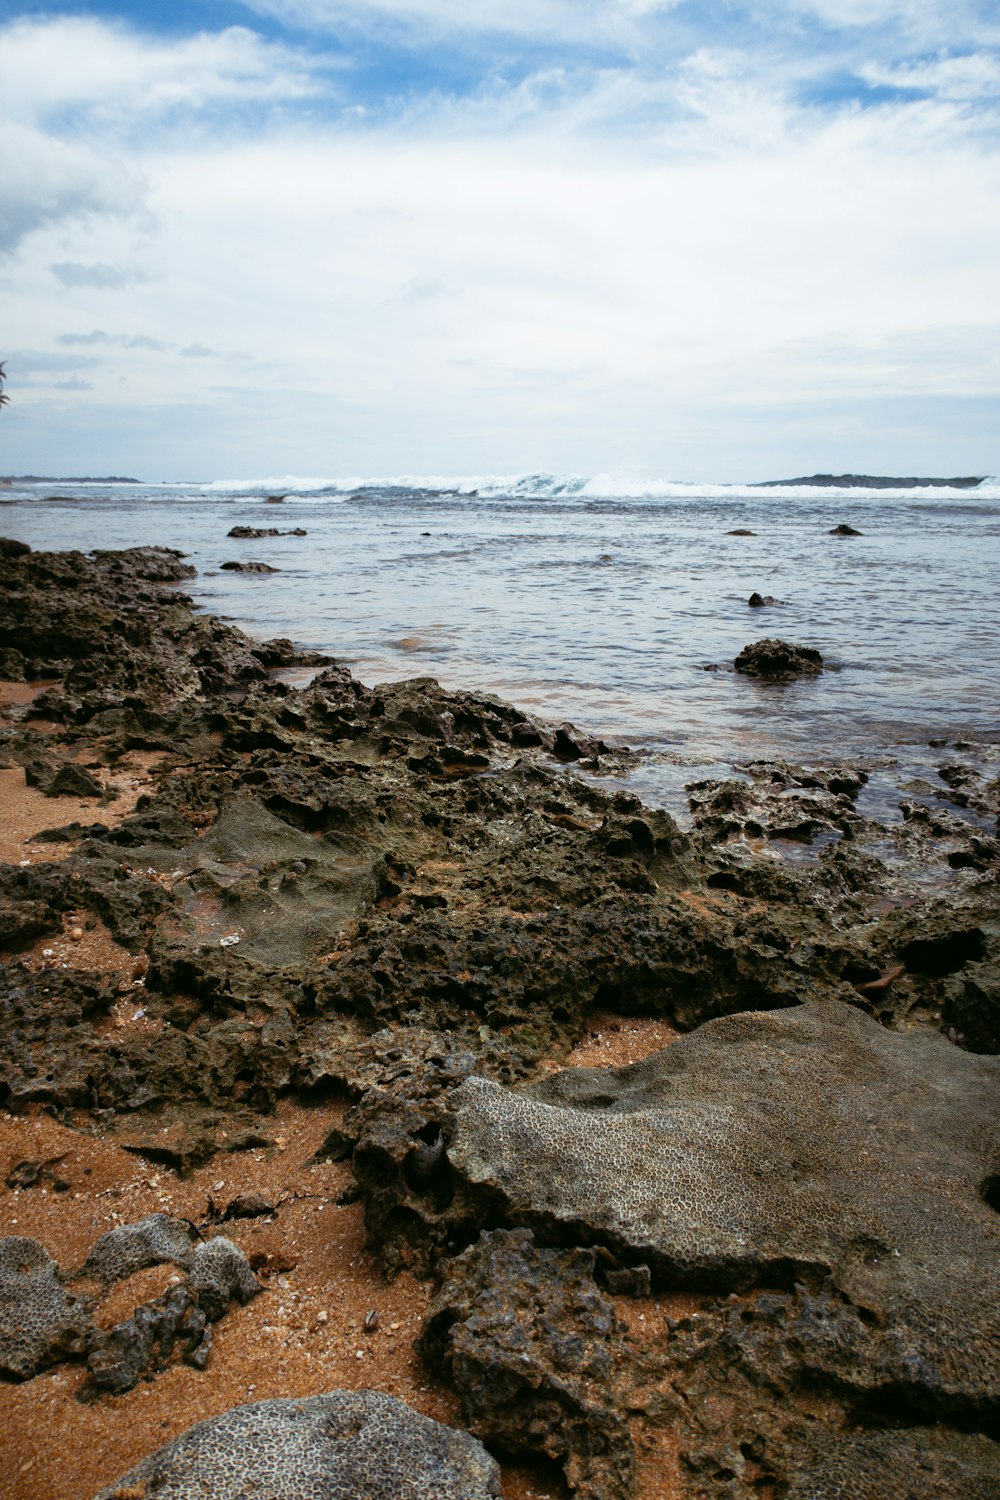 a view of the ocean from a rocky beach